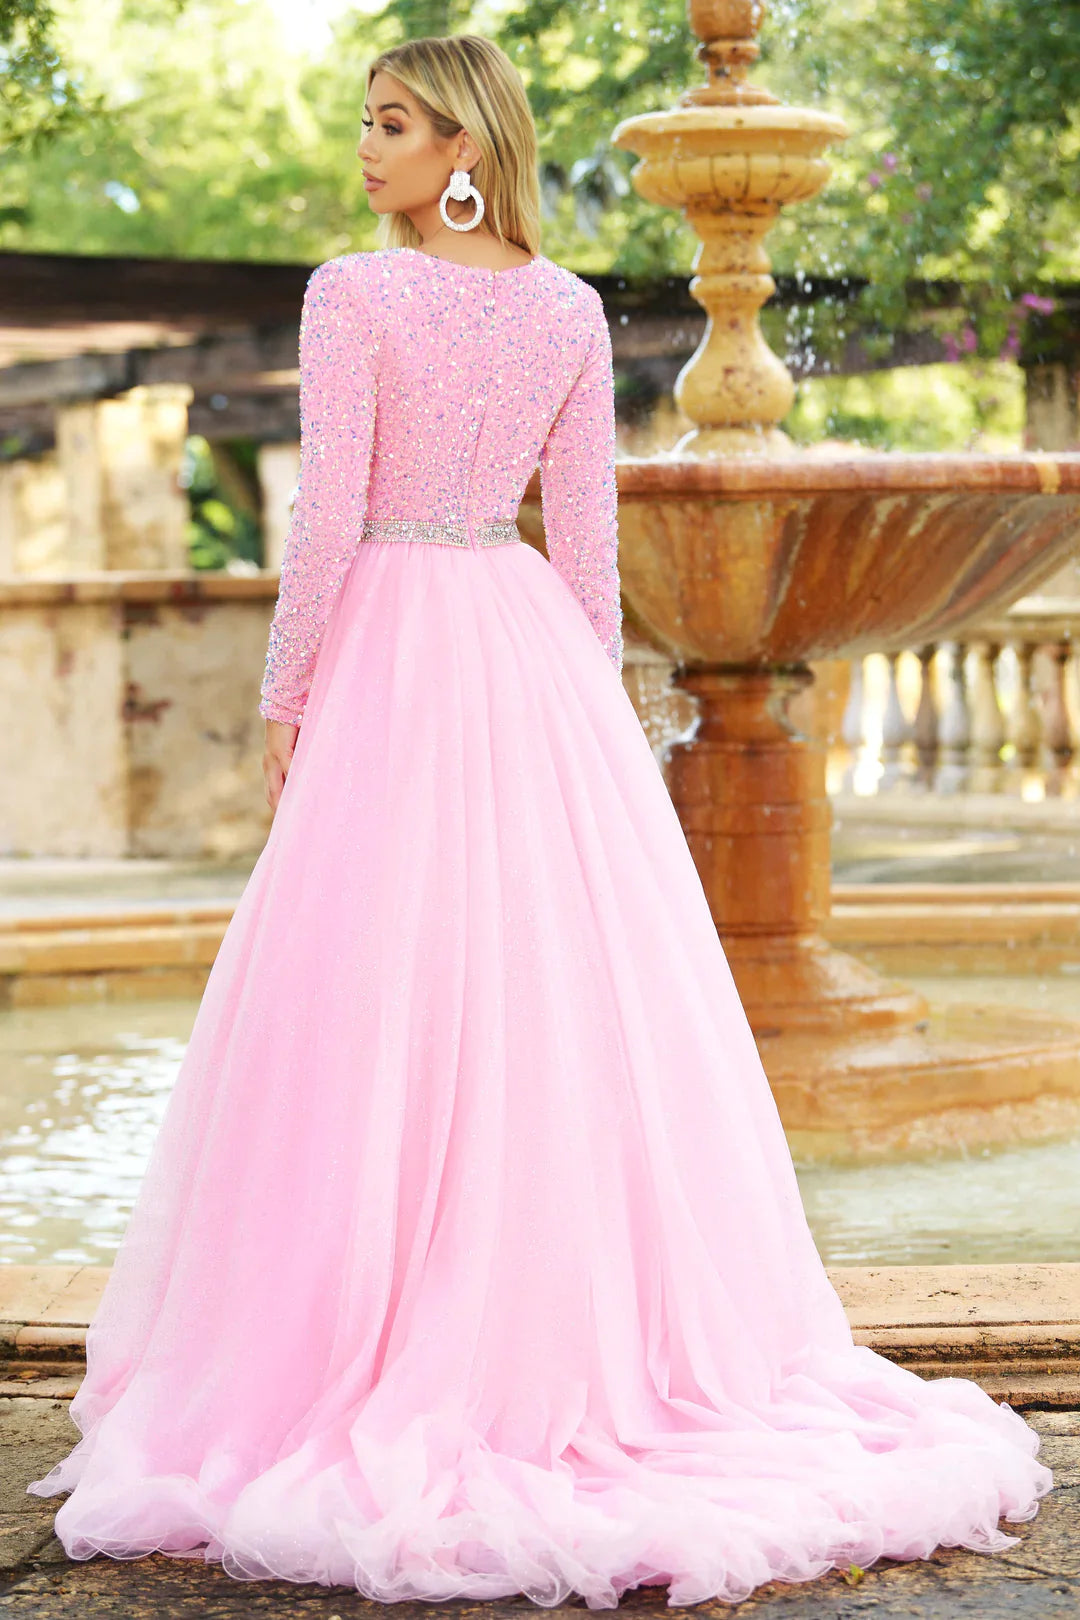 Ava Presley 38332 Long Sleeve Velvet Sequin Bodice with a V Neckline. Glitter Shimmer A Line Ballgown skirt with a crystal rhinestone waistband. full modest back coverage. Prom Dress Pageant Gown.  Sizes: 00-24  Colors: Royal, Red, Iridescent White, Iridescent Pink, Iridescent Light Blue